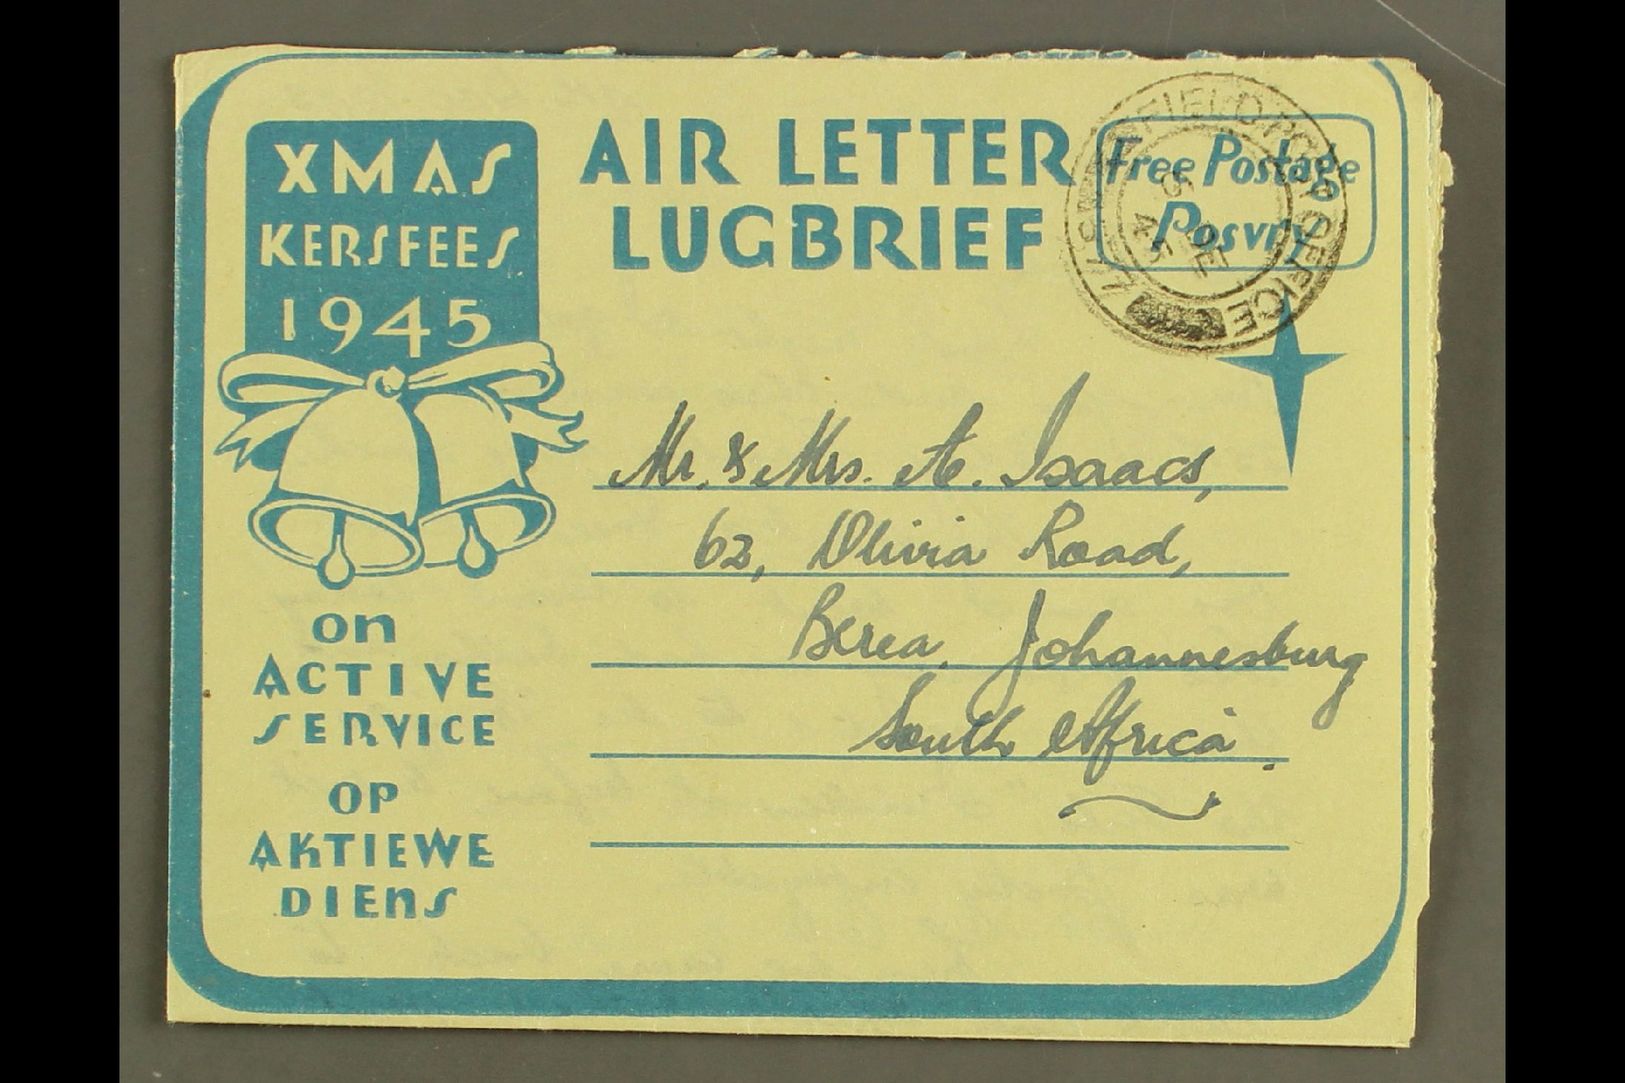 AEROGRAMME  1945 "Greetings From The North" Christmas Air Letter, Inscribed "Free Postage" For Serving Troops, 1979 Unio - Unclassified